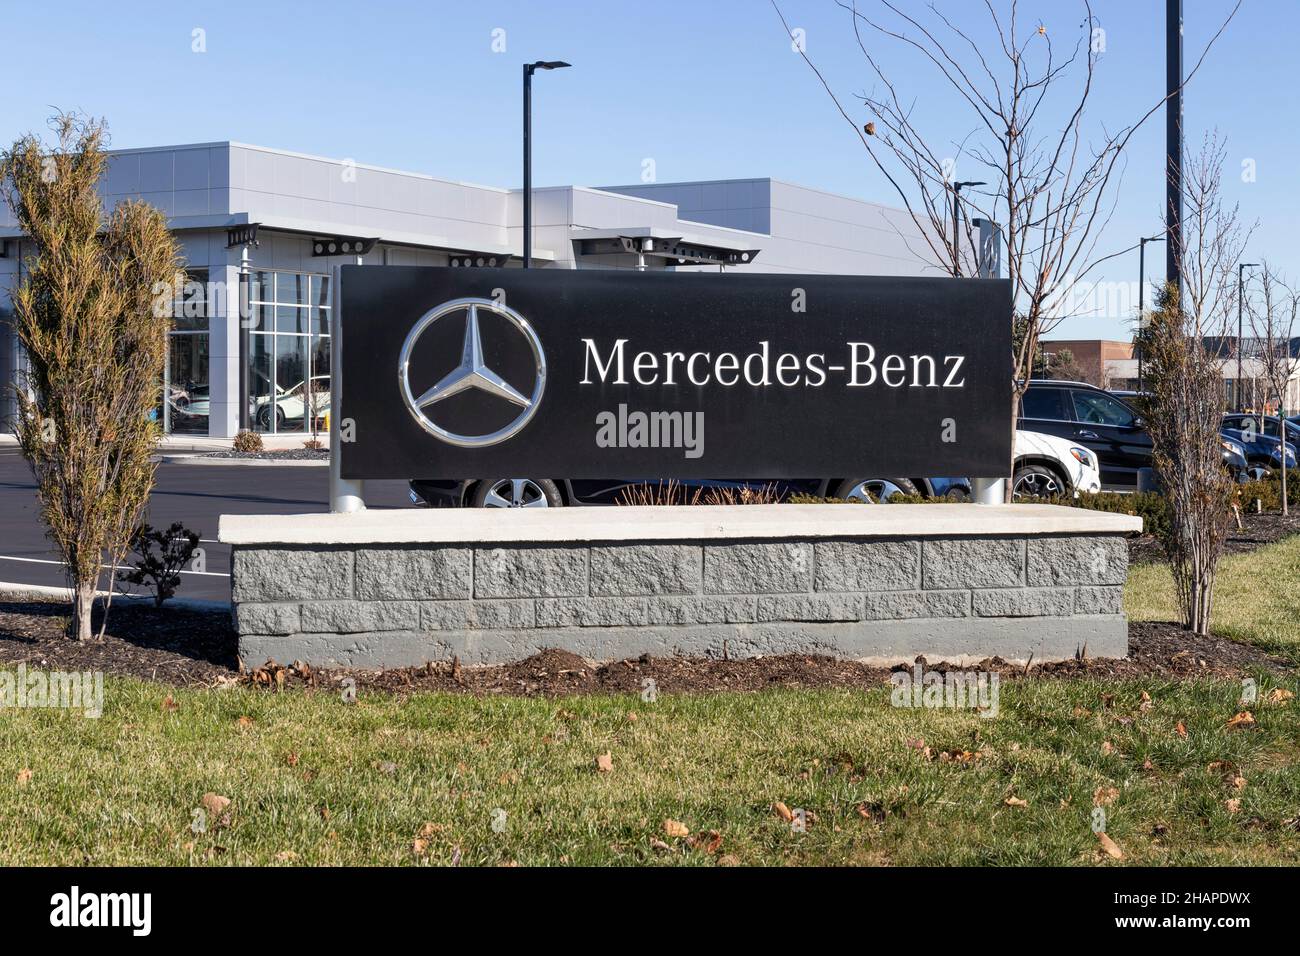 Indianapolis - Circa December 2021: Mercedes-Benz dealership. Mercedes-Benz is a global automobile manufacturer and a division of Daimler AG. Stock Photo